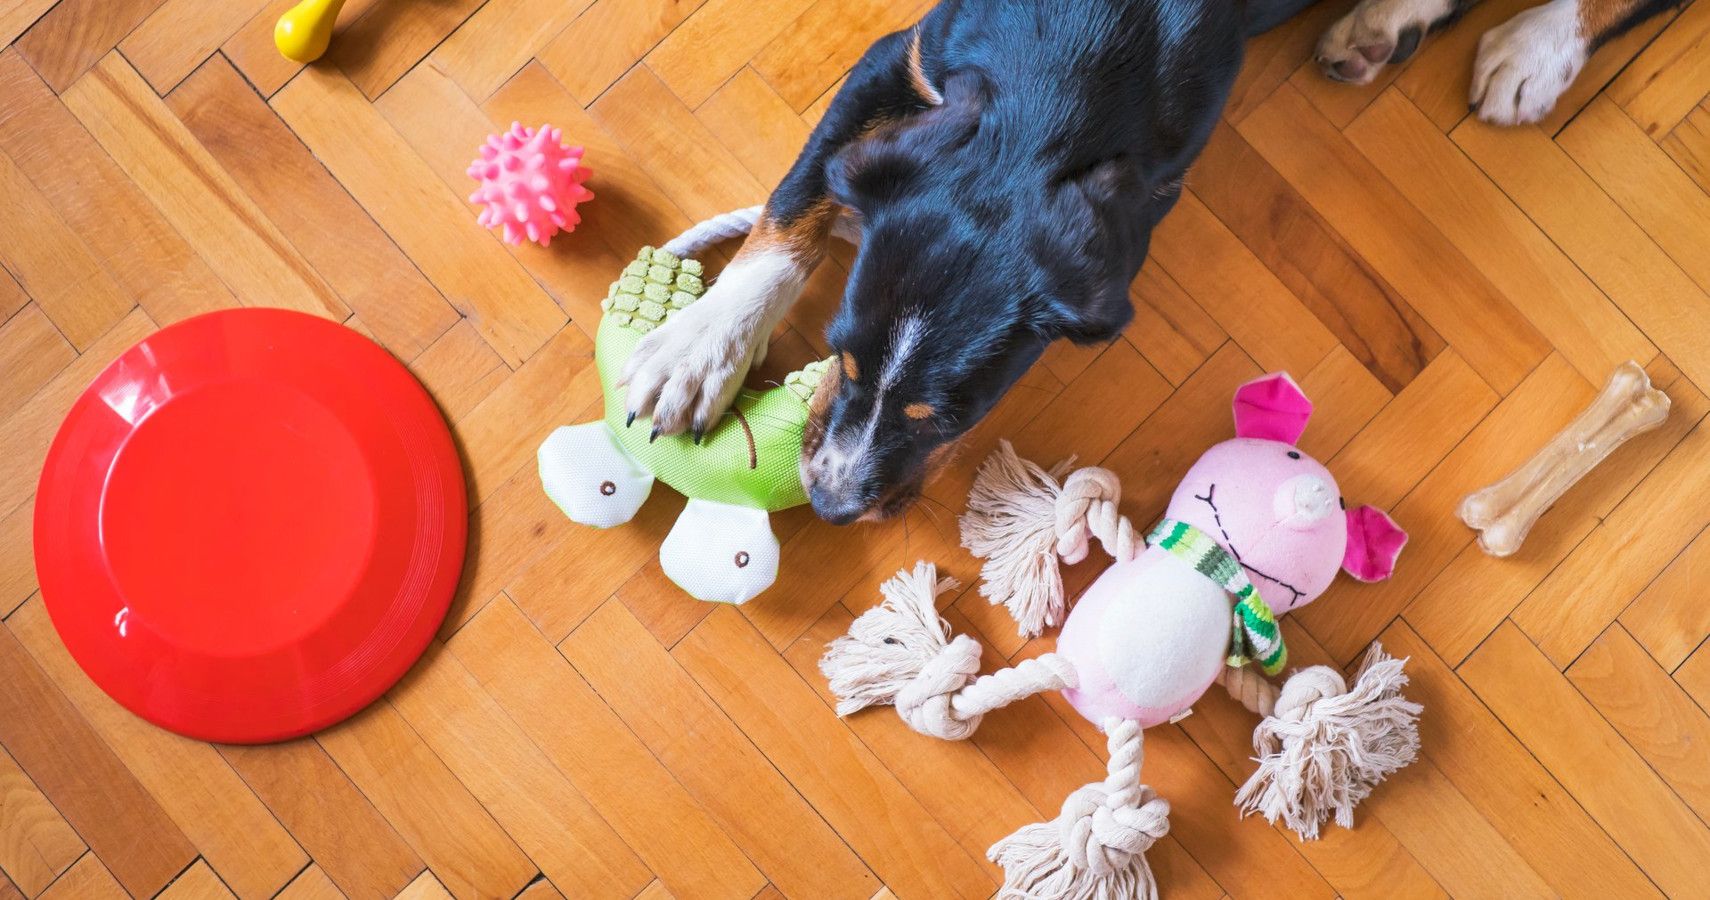 A dog playing with its toys on the floor